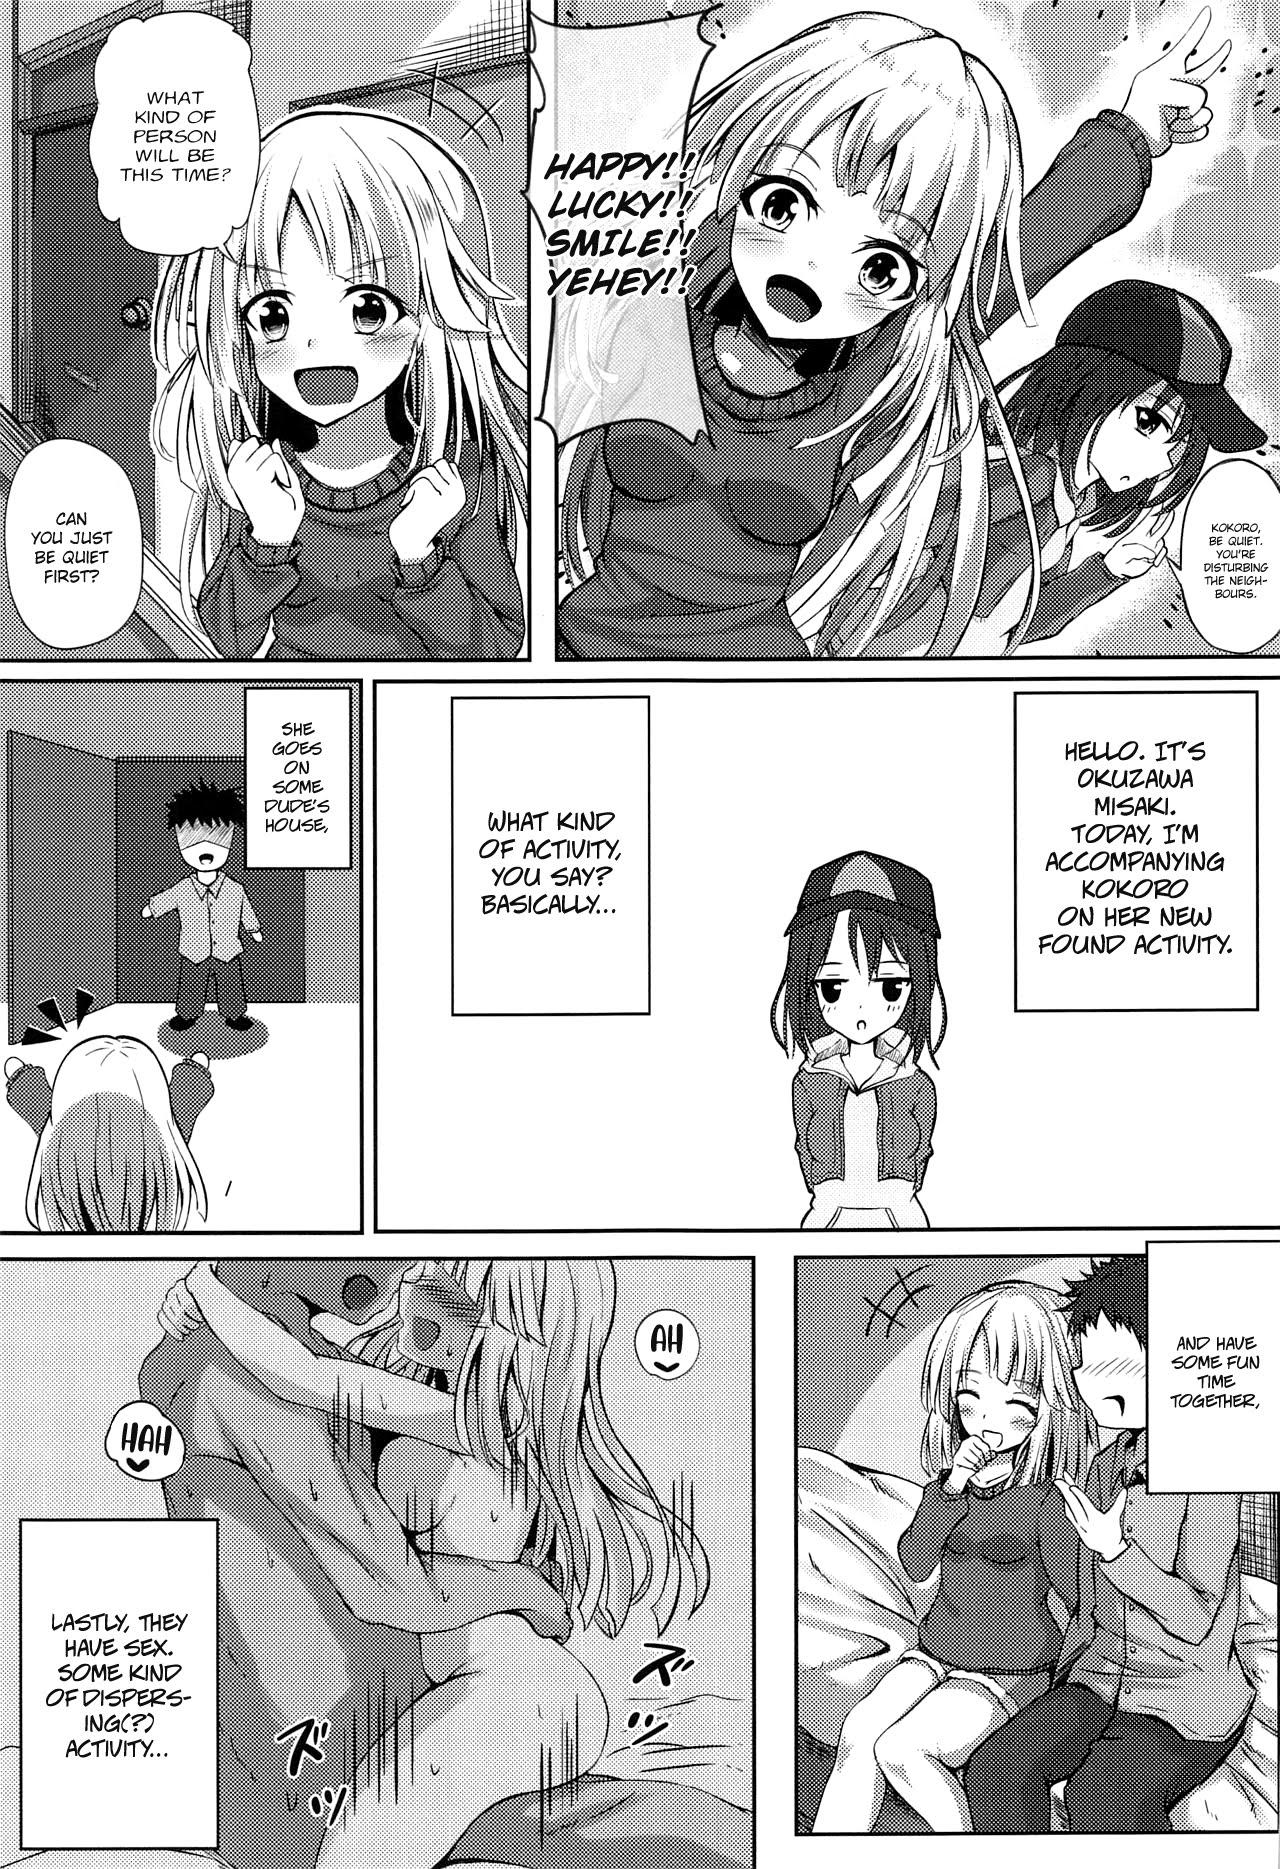 Amateur Sex HALLO HAPPY DELIVERY - Bang dream Girlsfucking - Page 2